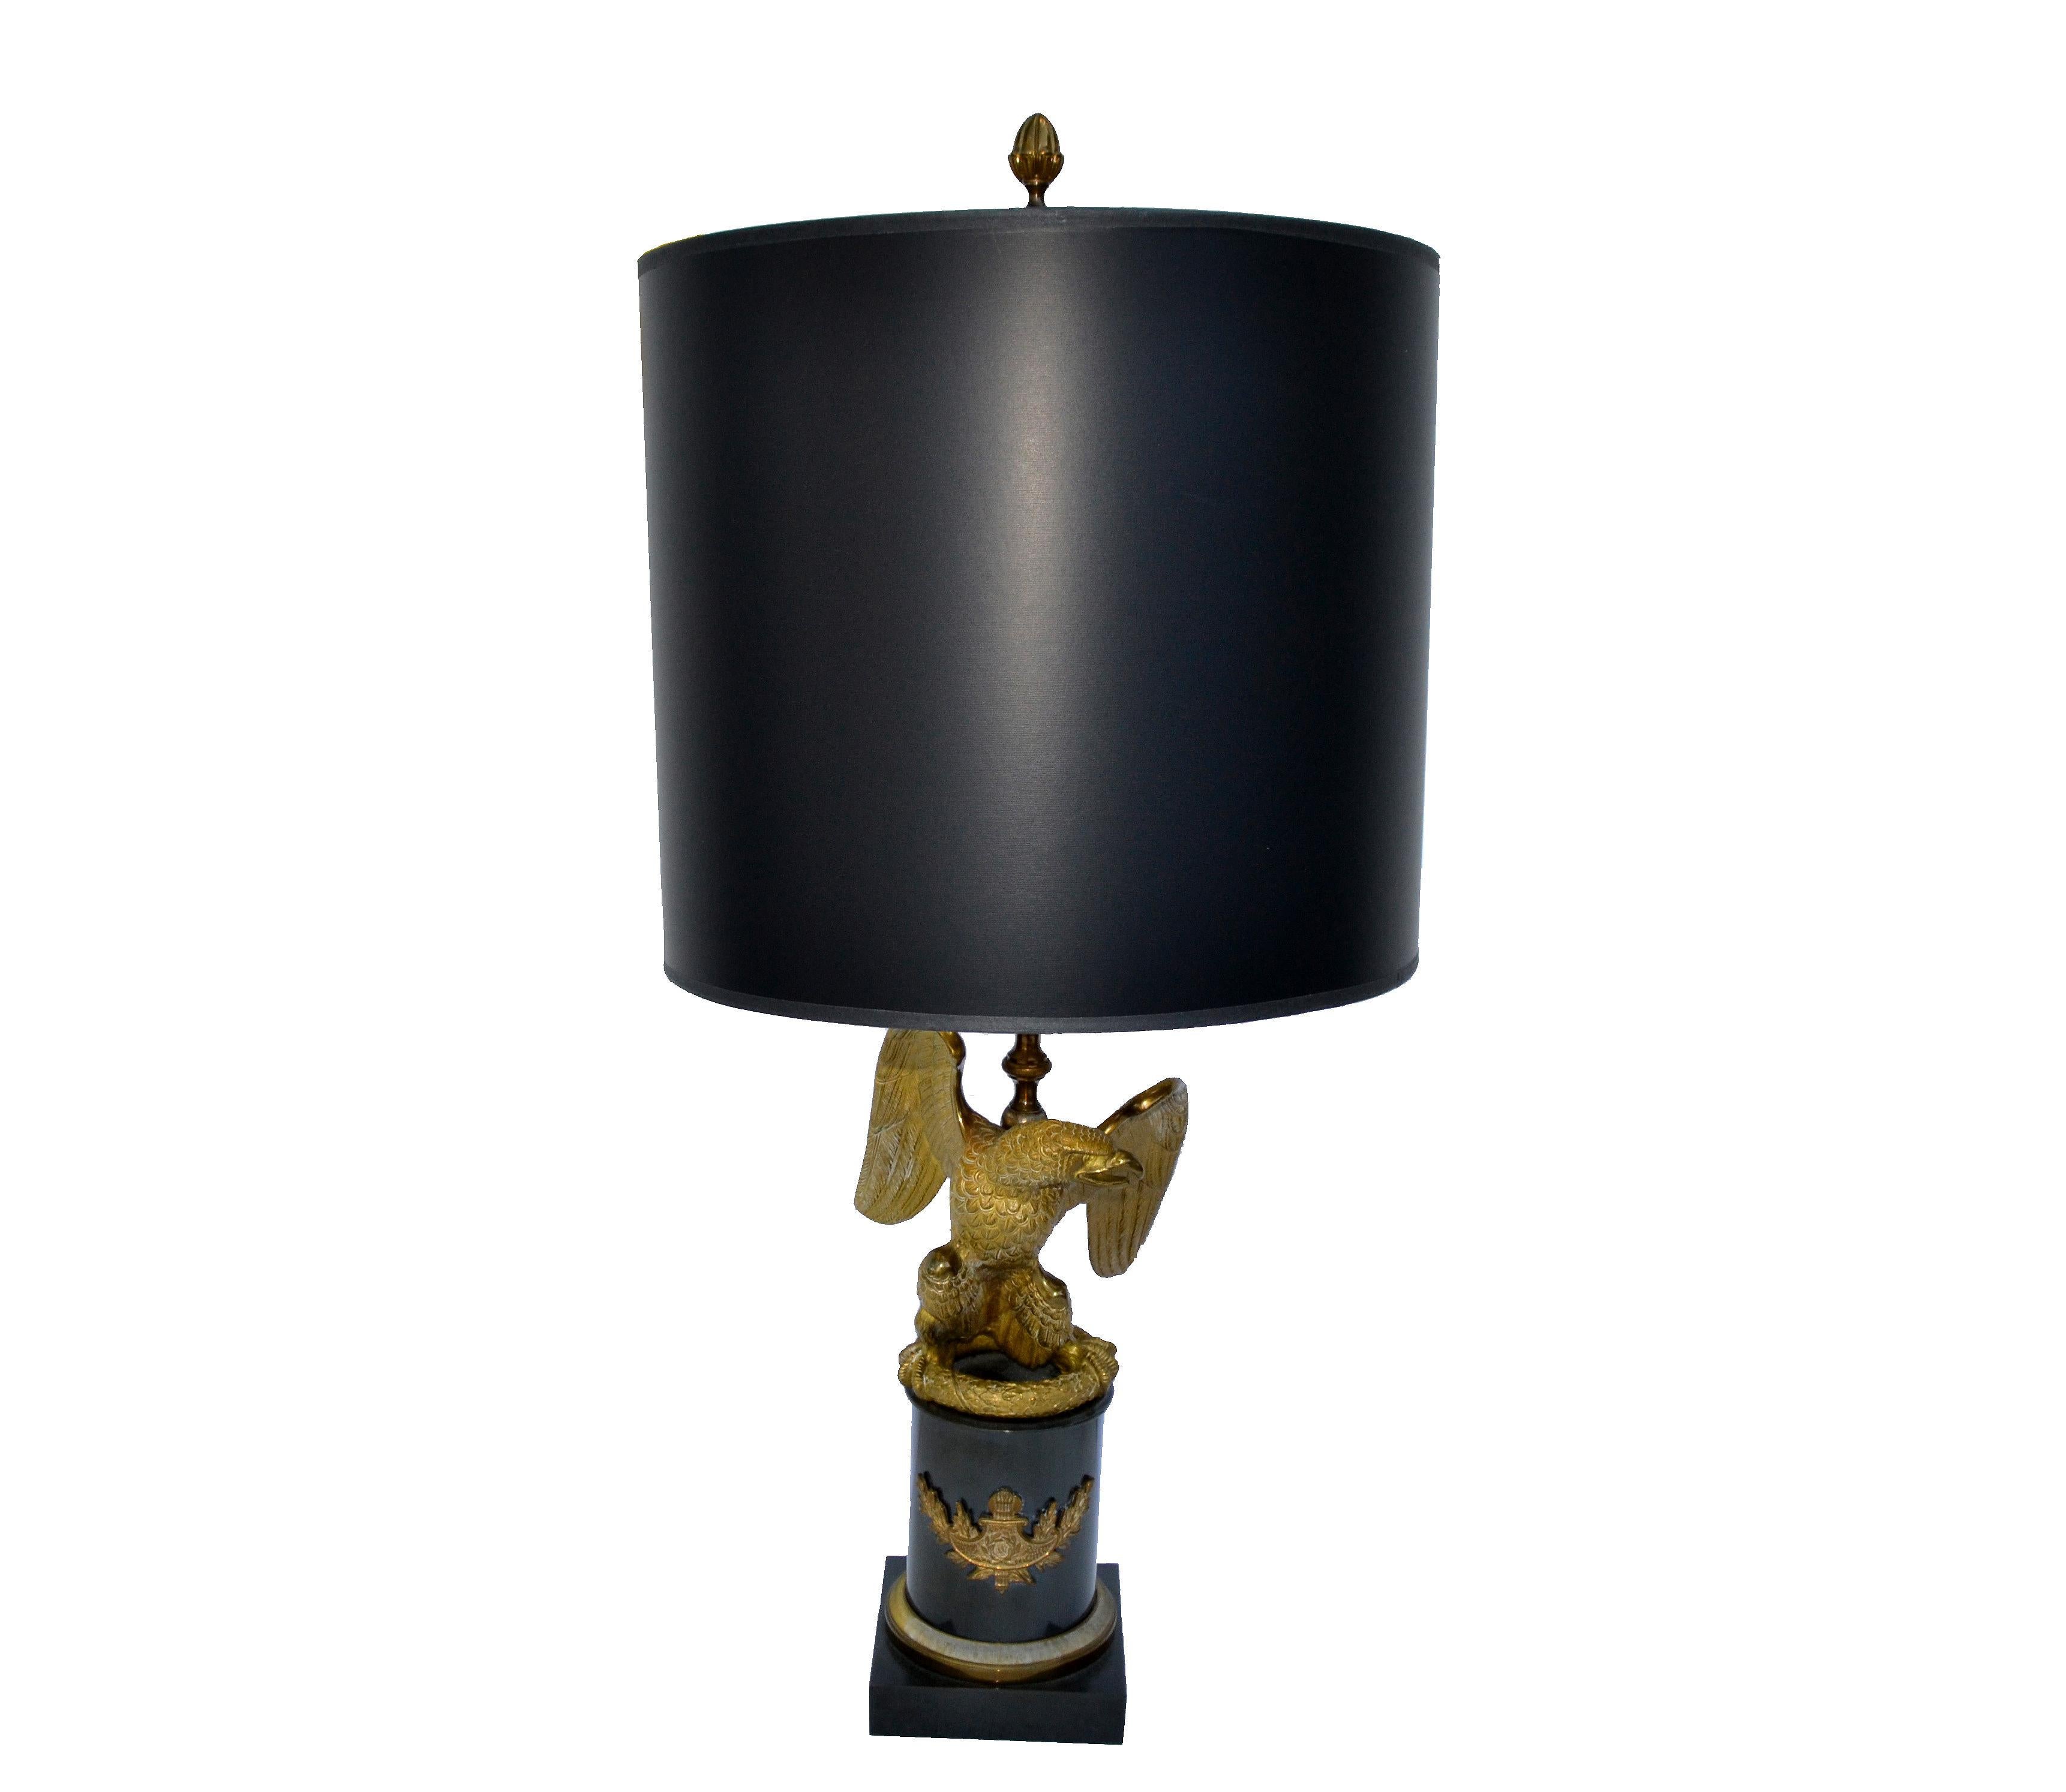 Superb Maison Charles table lamp stunning handmade hammered bronze eagle like a Trophy mounted on a Black Marble Pedestal.
US rewired and in working condition. It takes three regular or LED light bulbs with 40 watts per light. 
Signed on the